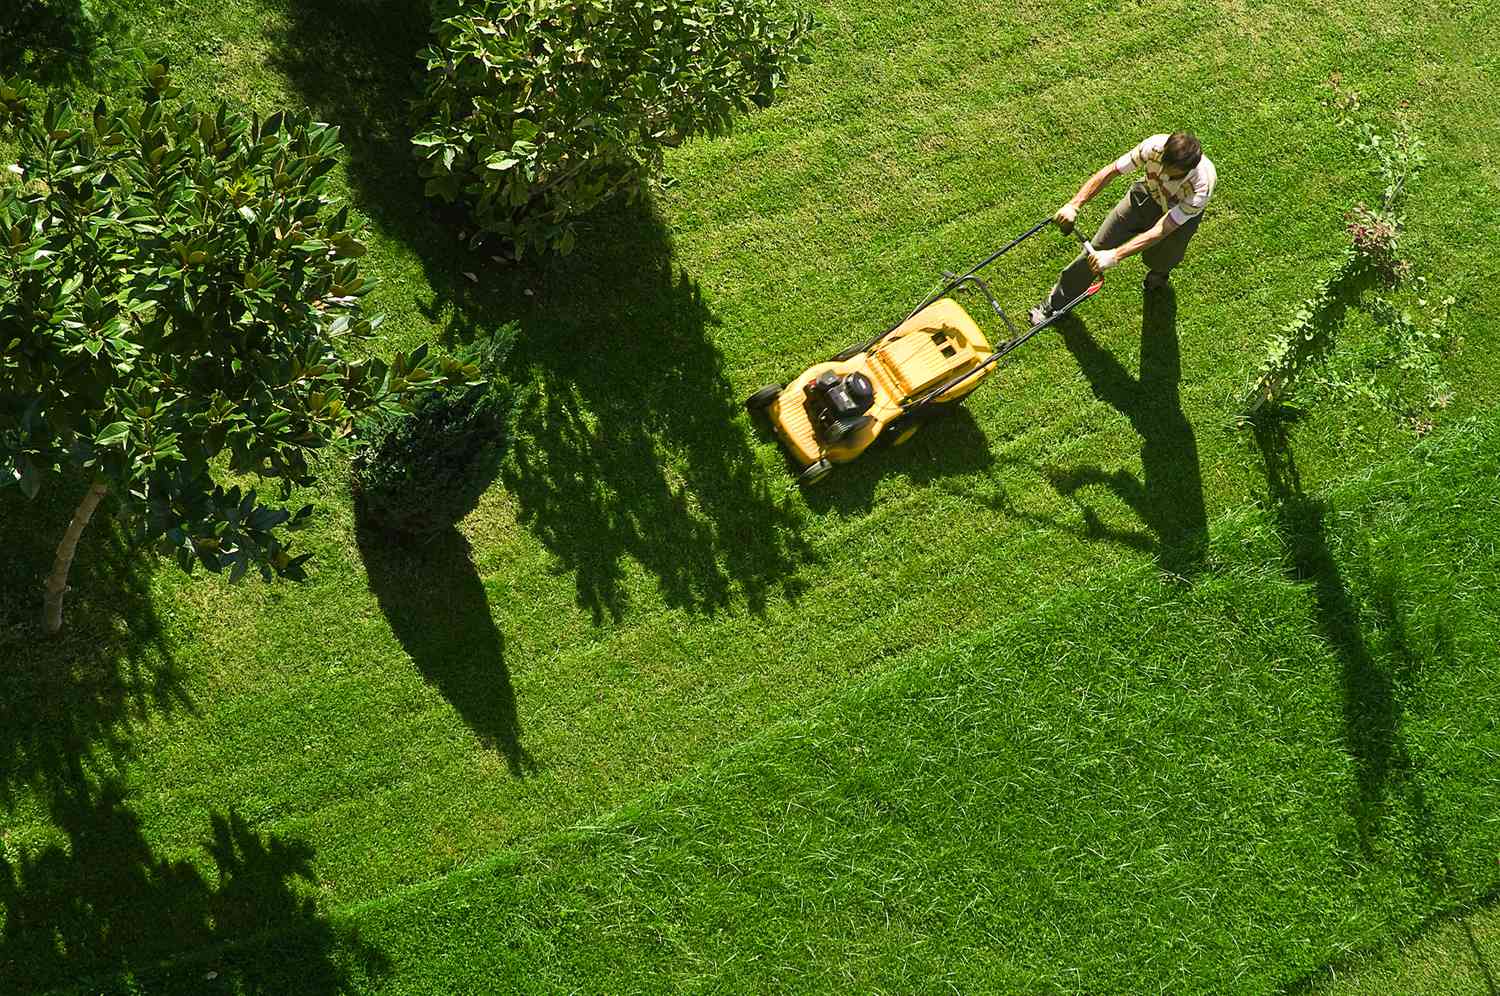 A Lawn to Love: Local Services to Make You Smile!